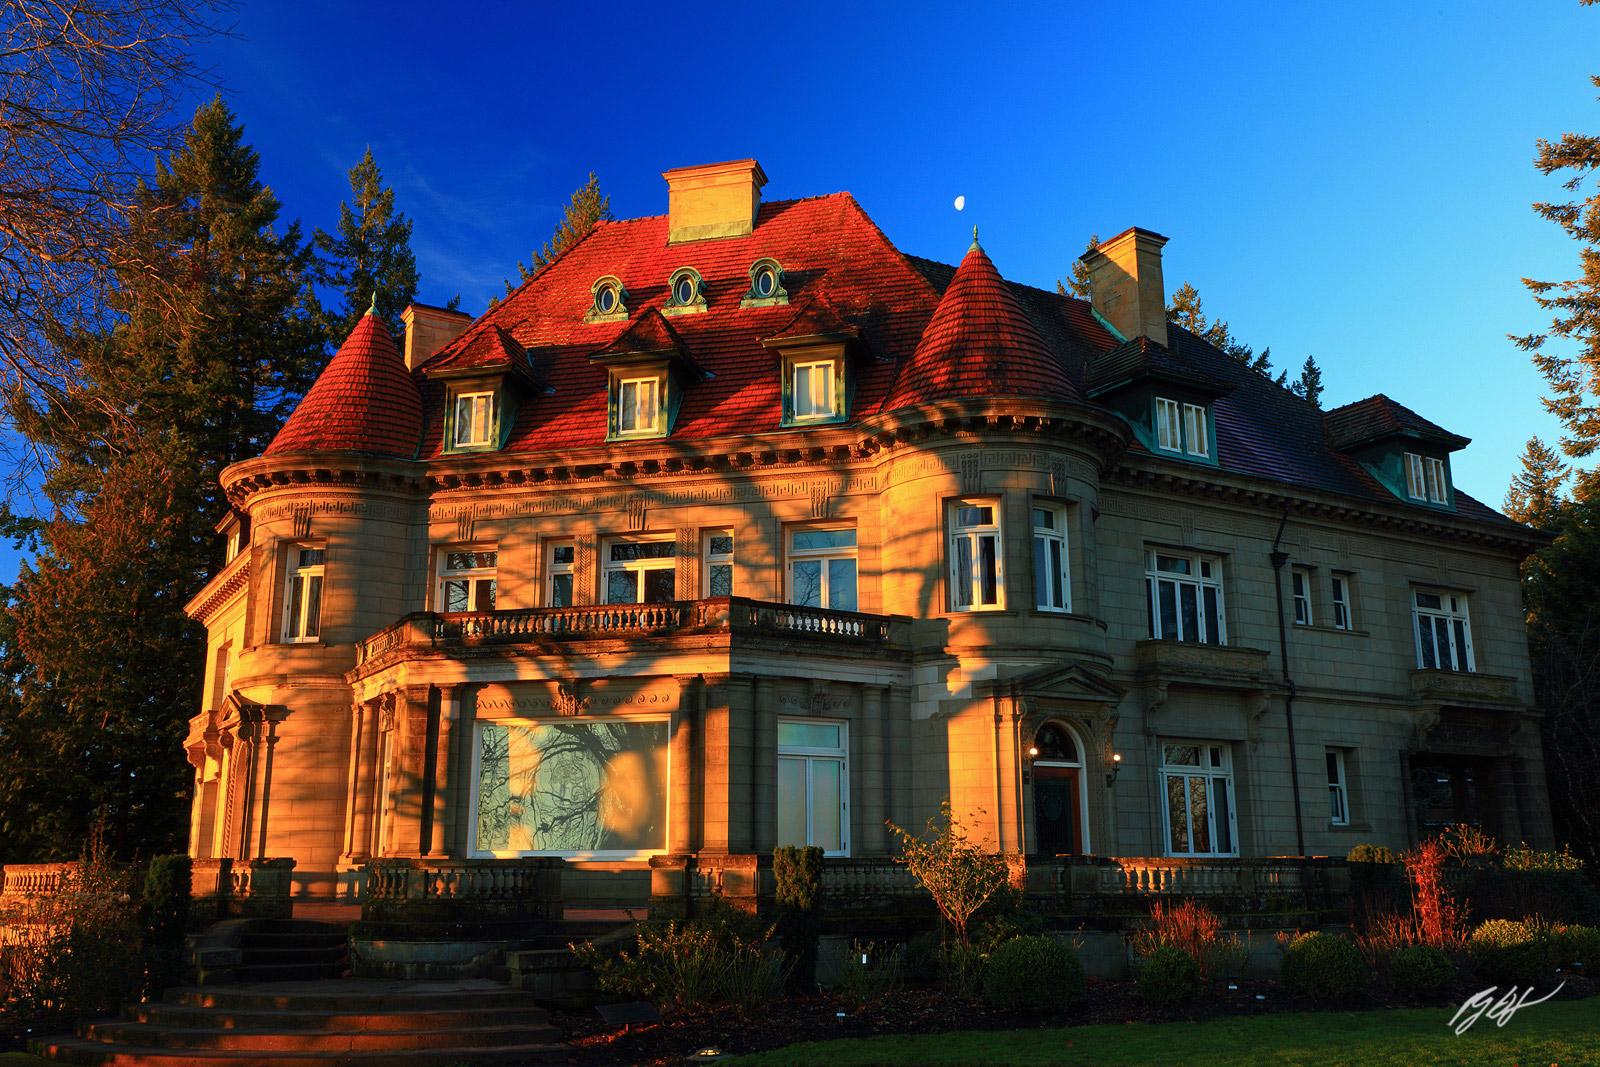 The Pittock Mansion is a French Renaissance-style château in the West Hills of Portland, Oregon, United States.